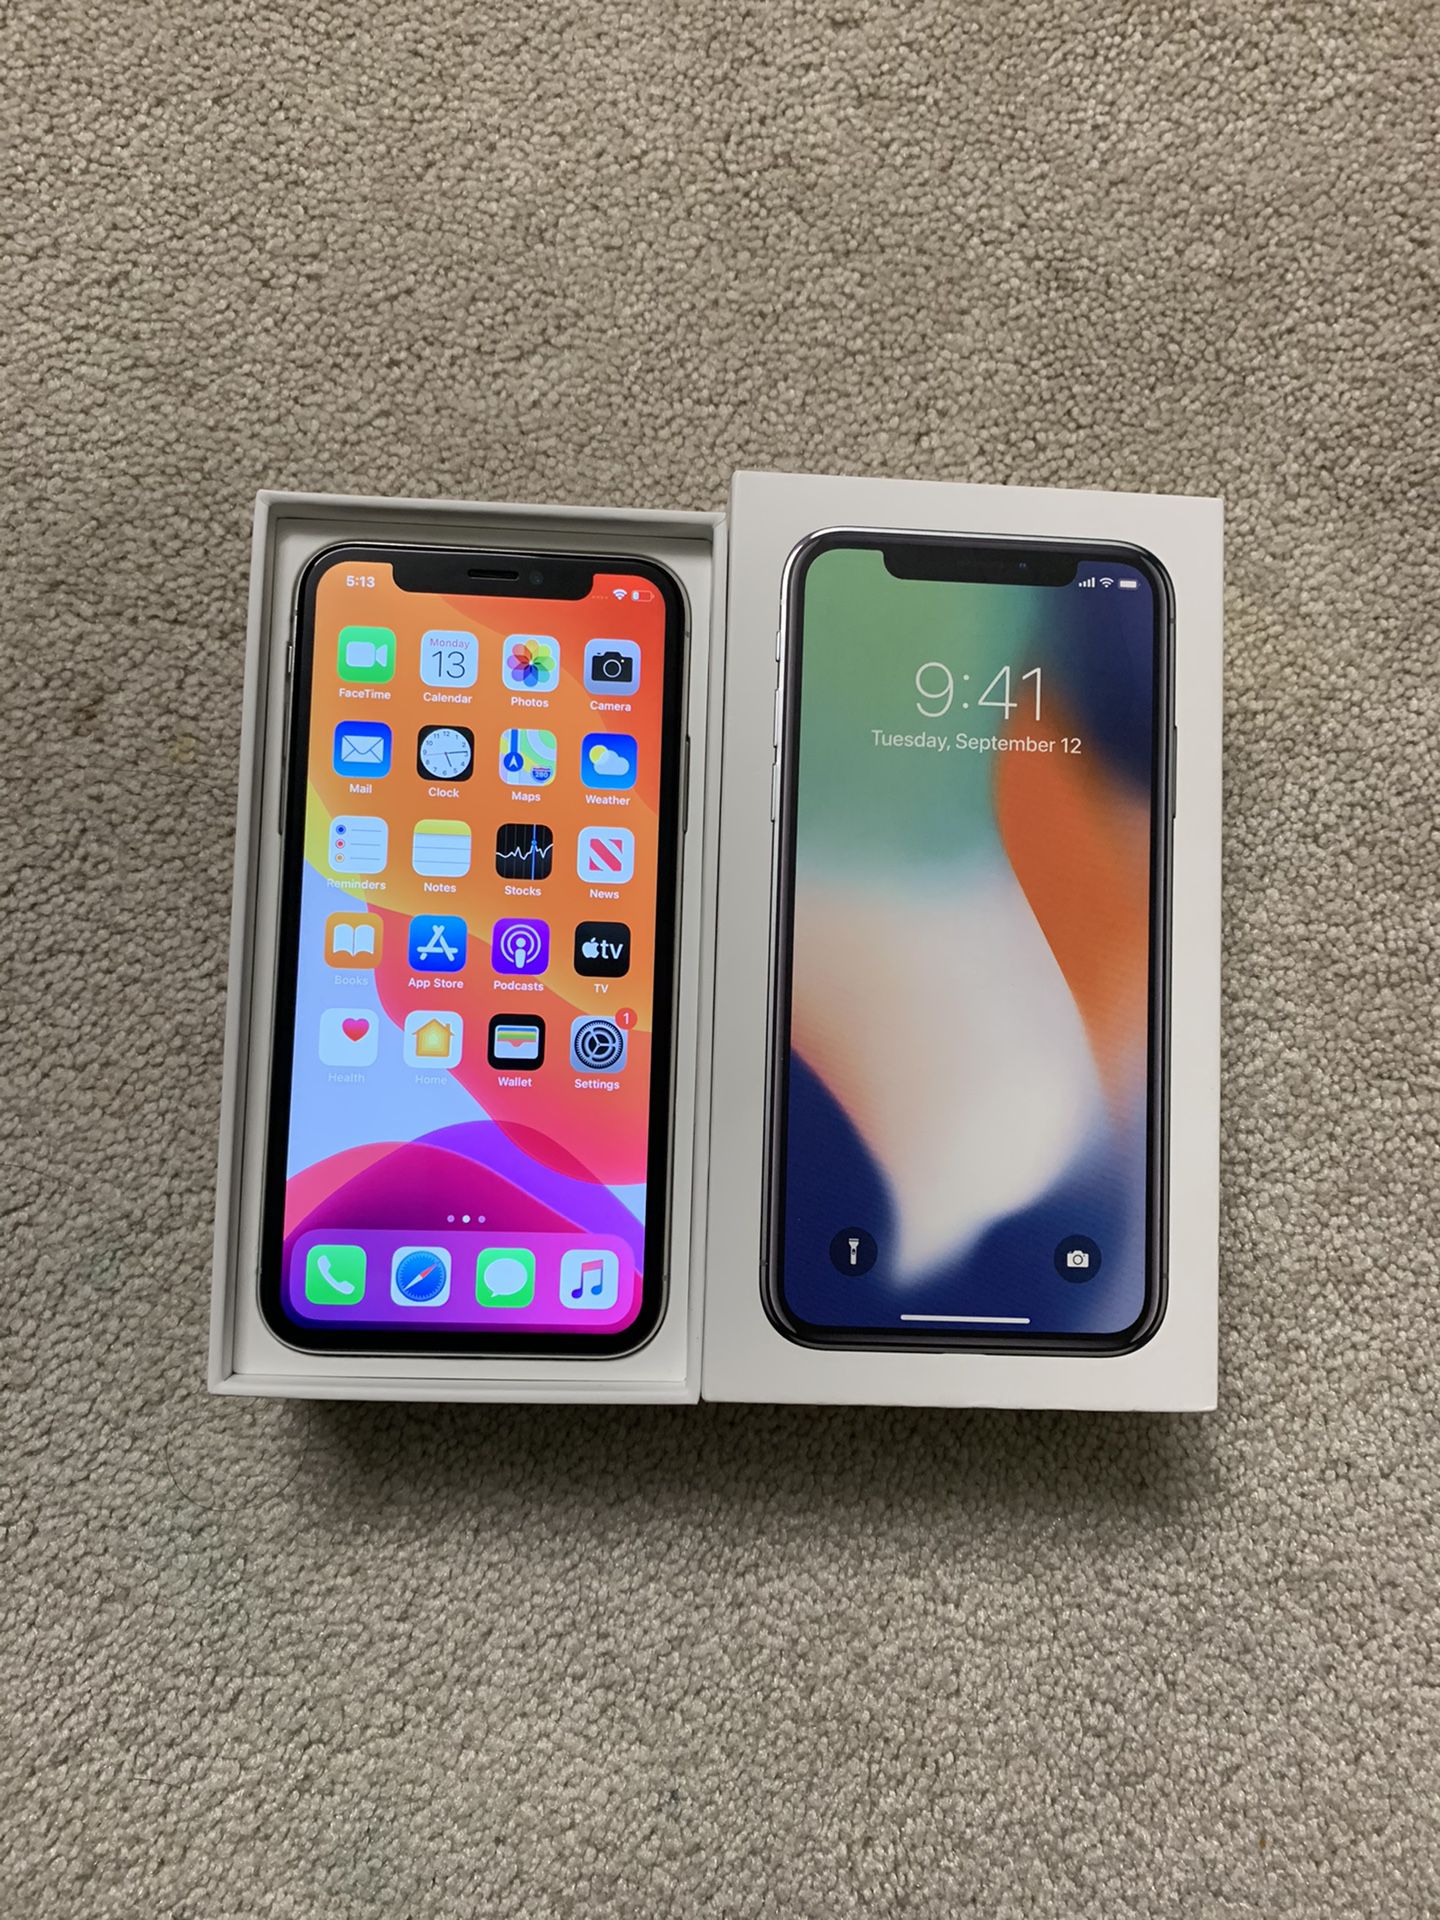 iPhone X 64gb Unlocked , good condition for sale $500 thanks